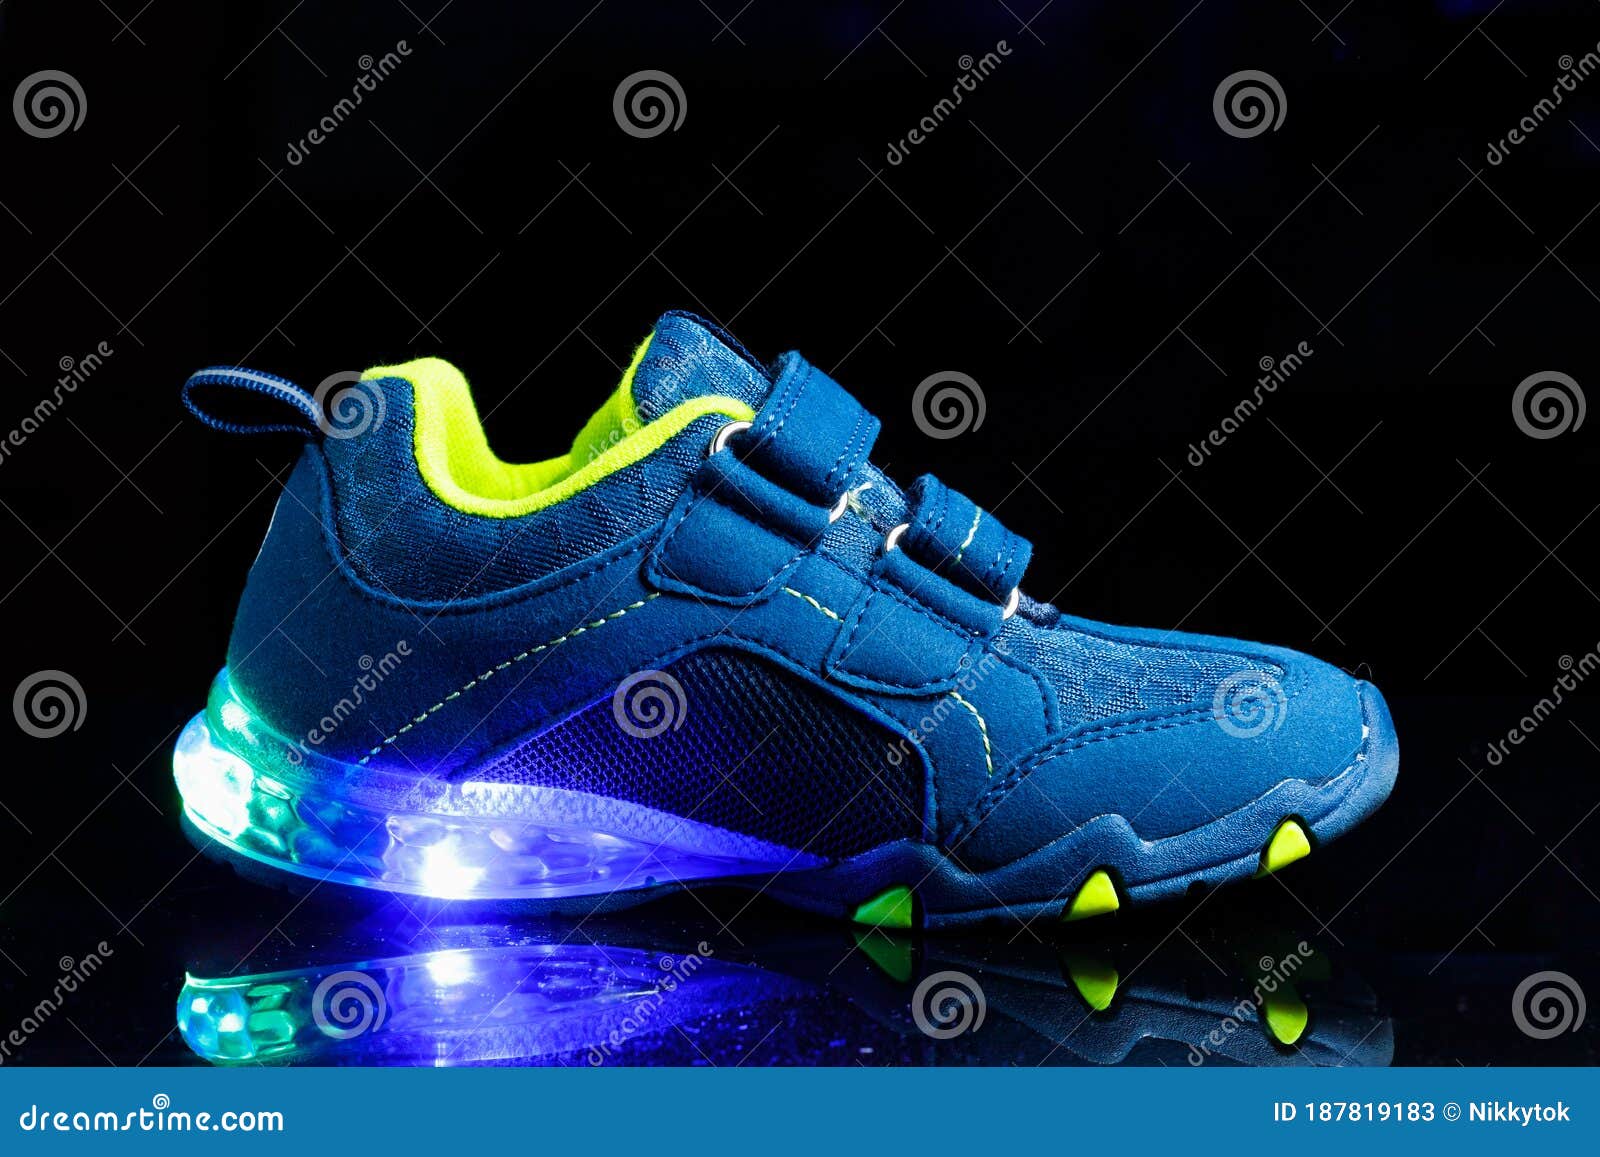 Buy Ufatansy LED Shoes Roller Skate Shoes USB Charging Flashing Roller Sneakers  Light Up Skates Shoes Sneakers with Wheels Kids Girls Boys (4.5 M US =CN37,  Double Wheels, Golden) at Amazon.in